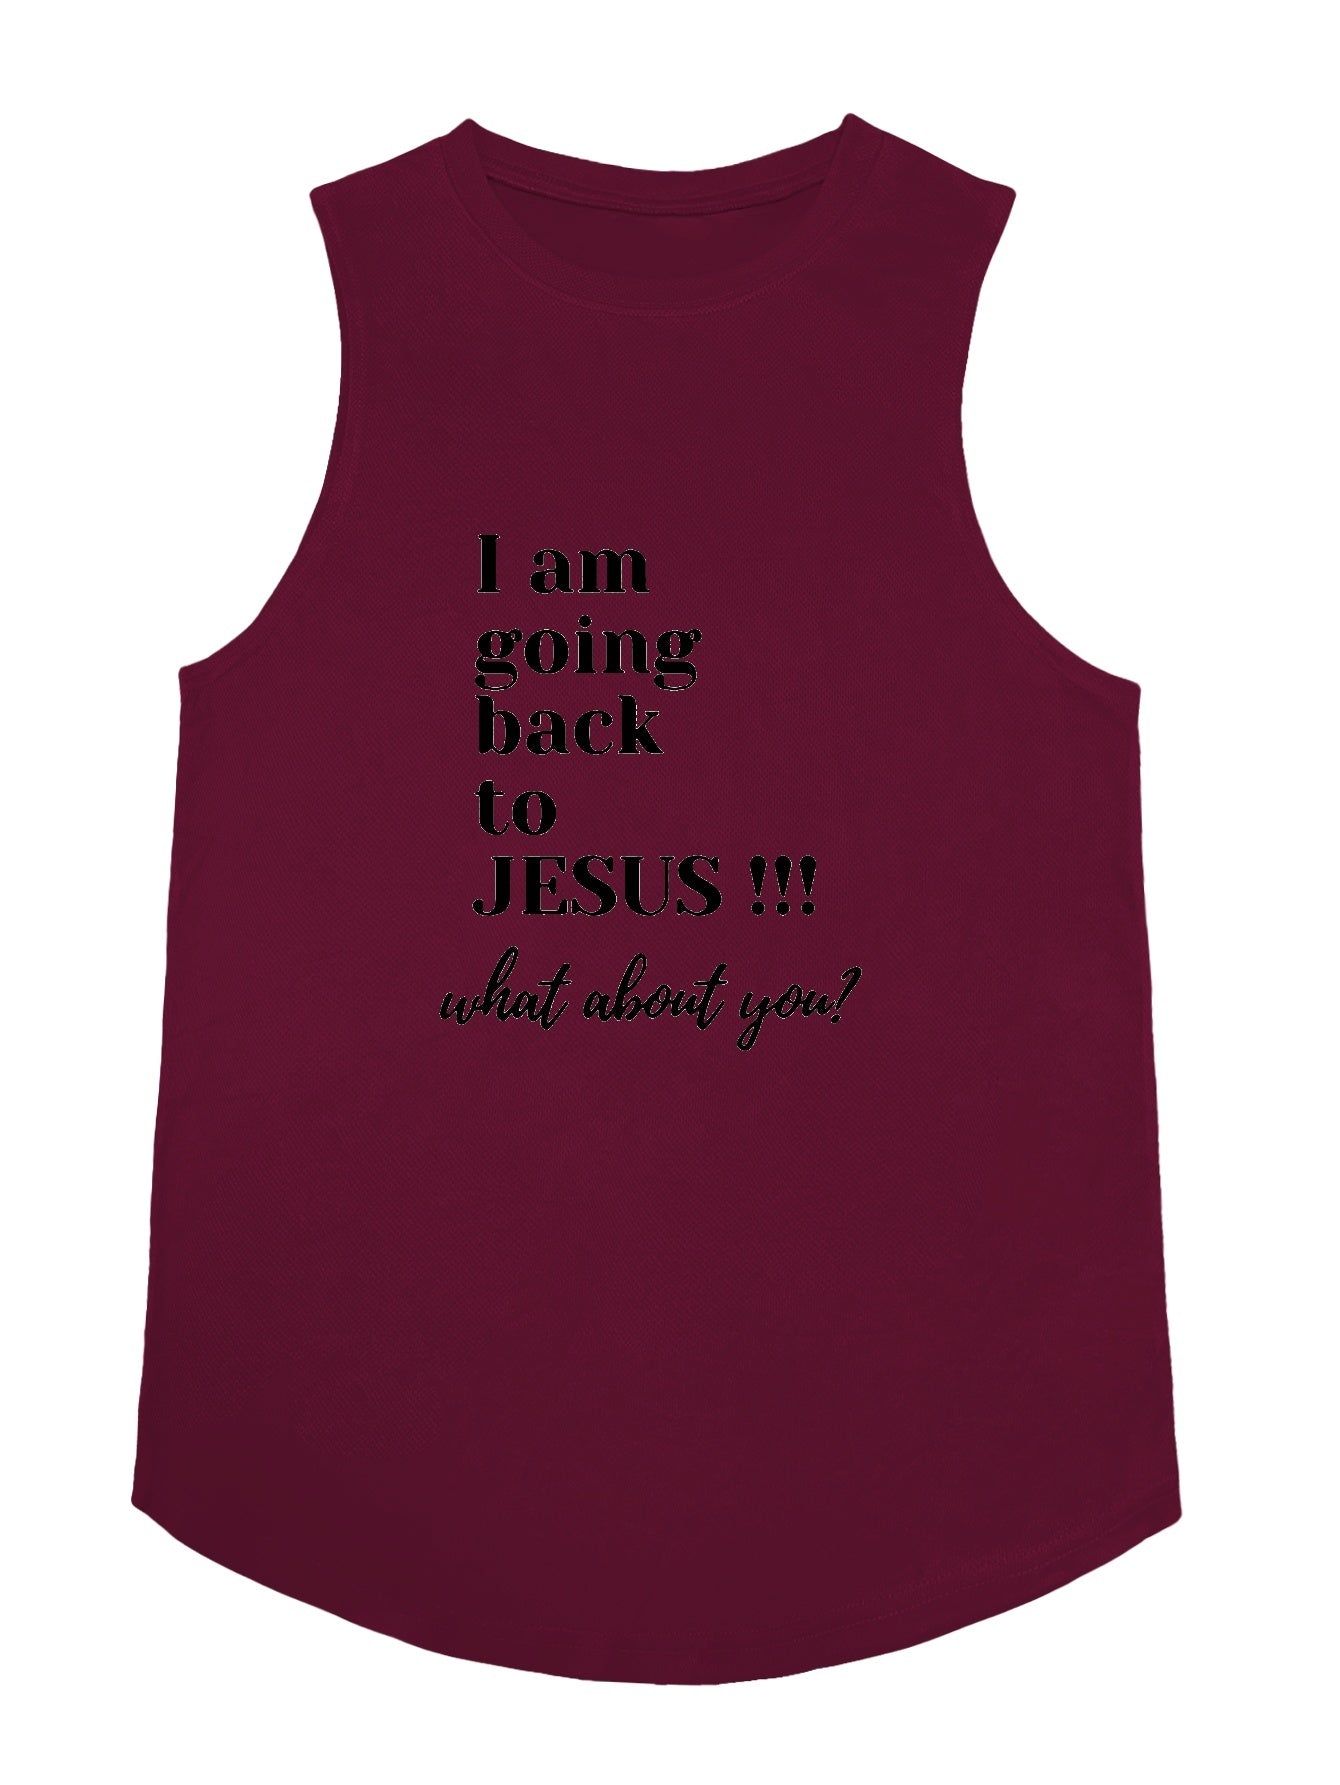 I Am Going Back To Jesus What About You Or Normal Isn't Coming Back Men's Christian Tank Top claimedbygoddesigns